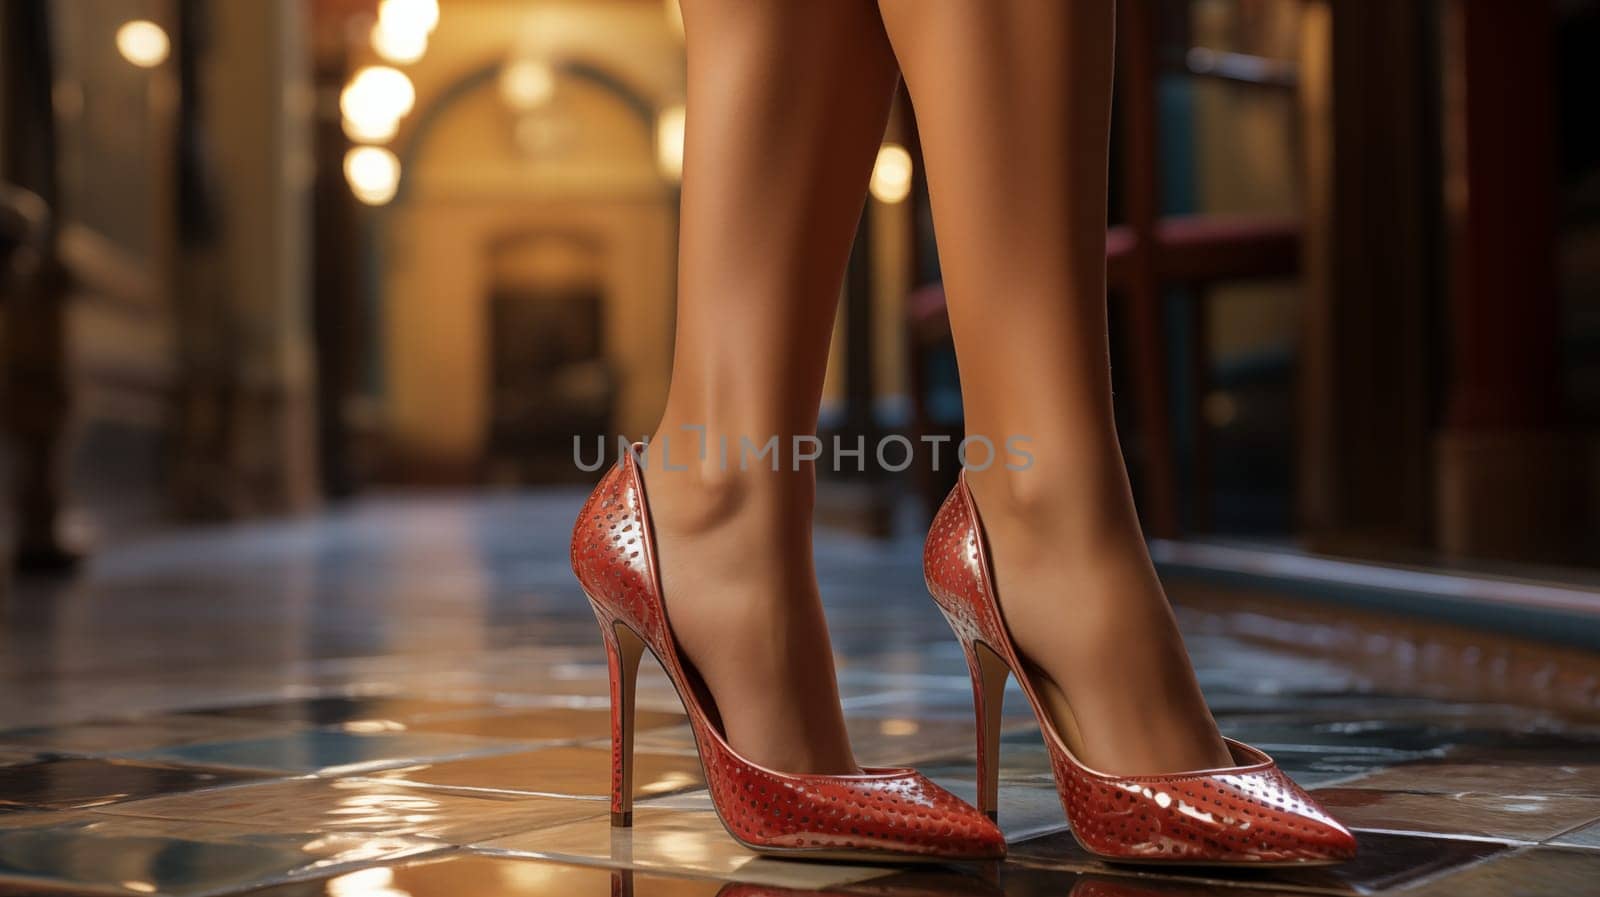 A pair of red ostrich leather high heel pumps on a polished hallway floor.